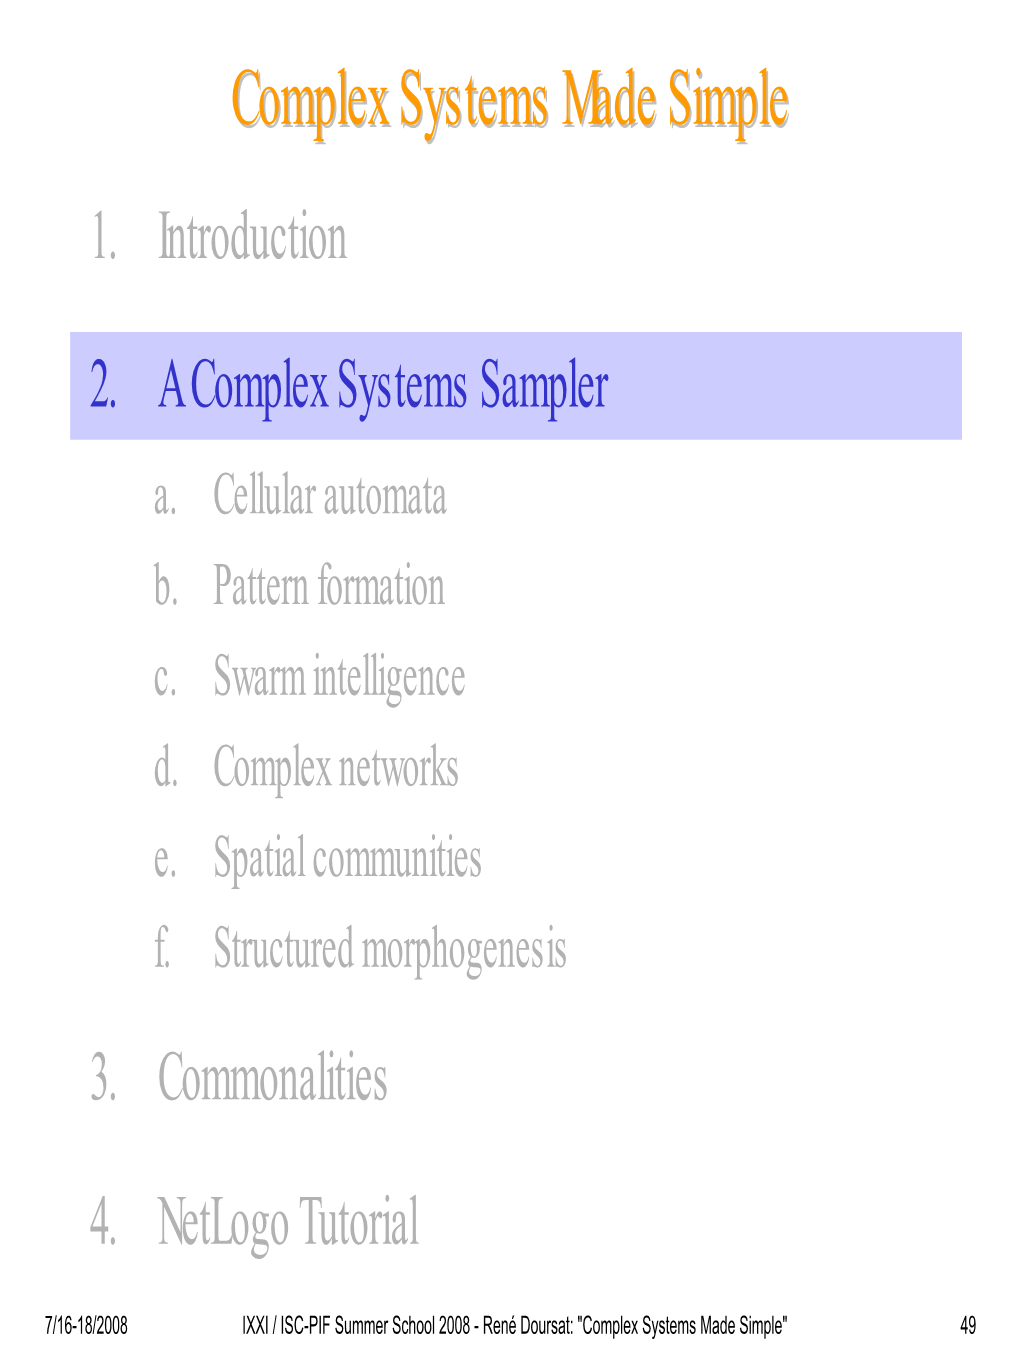 Complex Systems Made Simple" 49 Complexcomplex Systemssystems Mademade Simplesimple 1